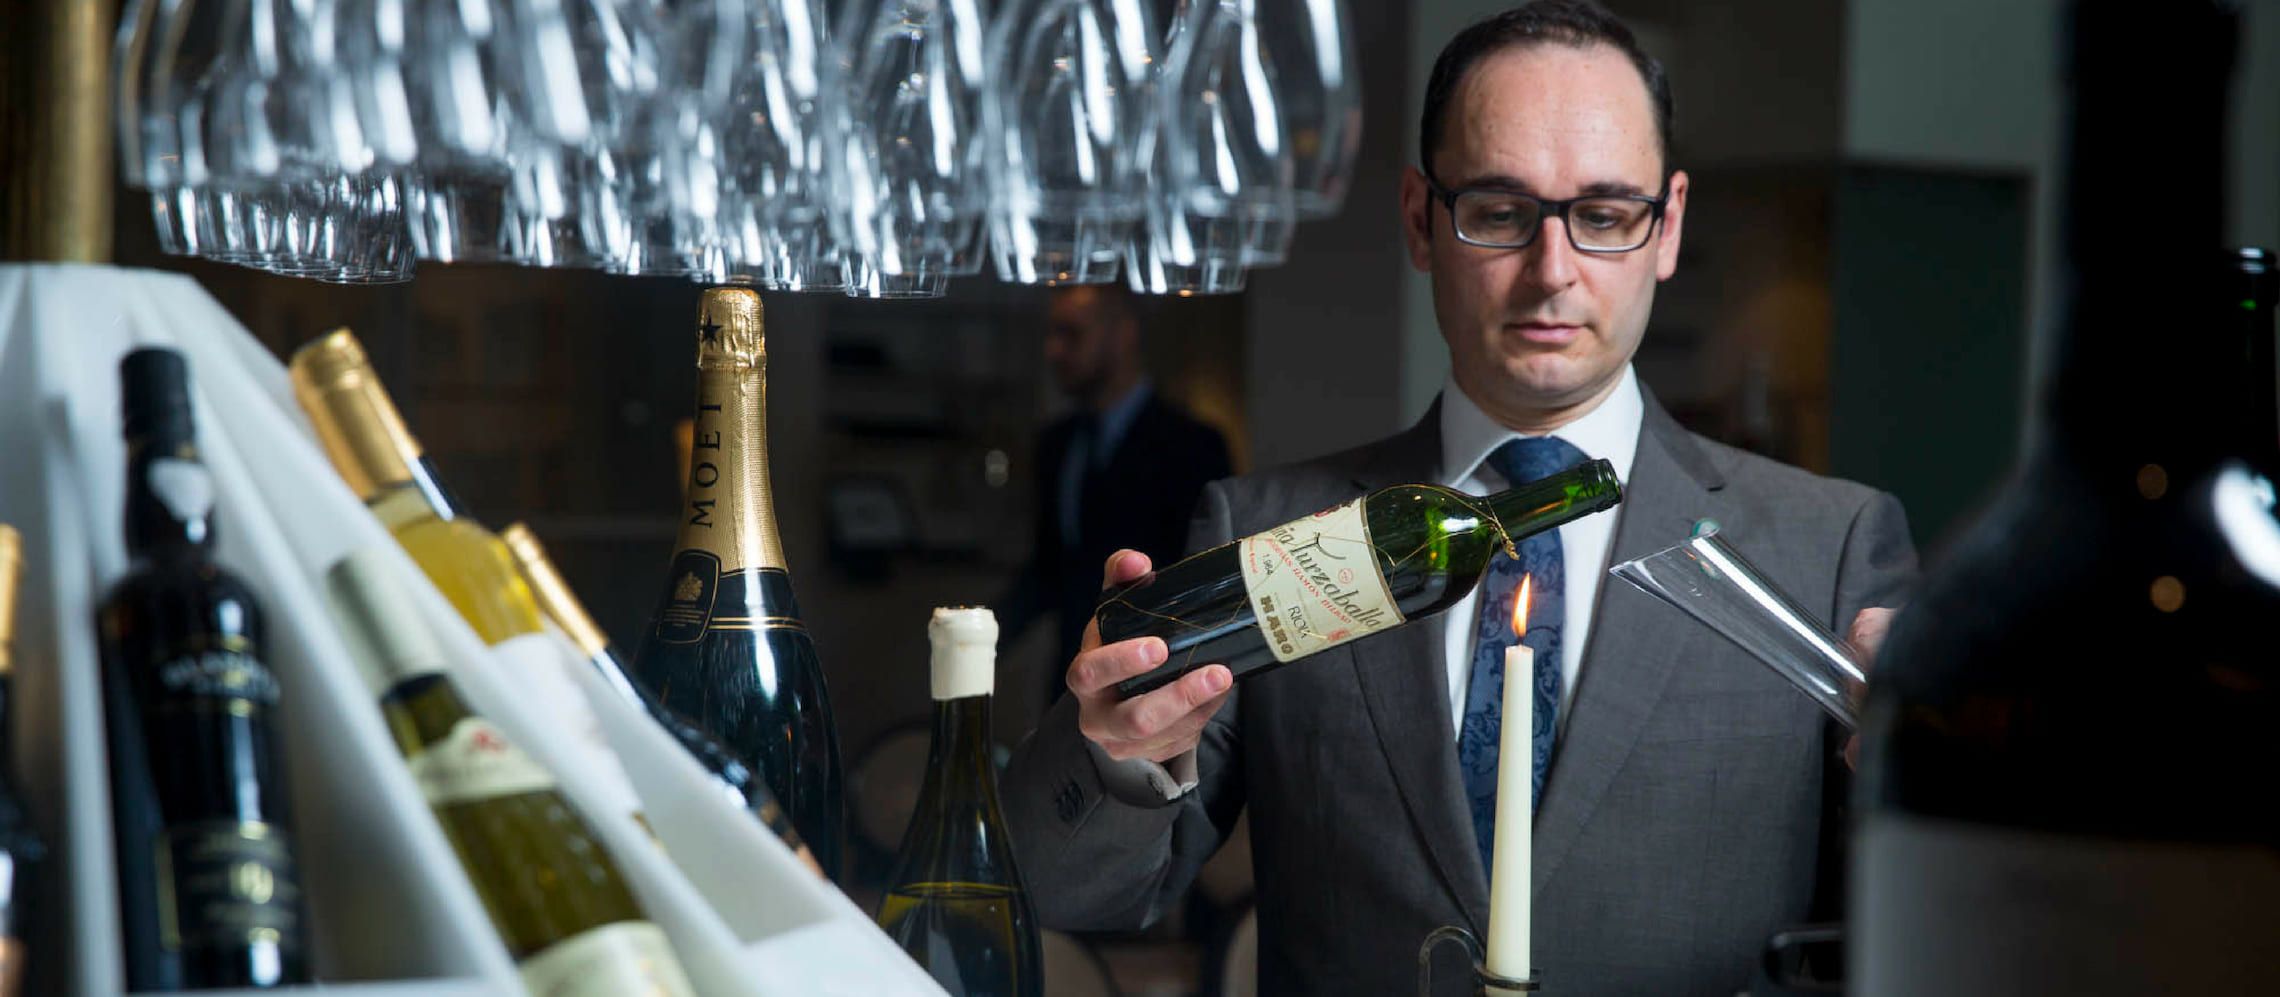 Photo for: Insights from Augustin Trapero, Head Sommelier at Avenue, London